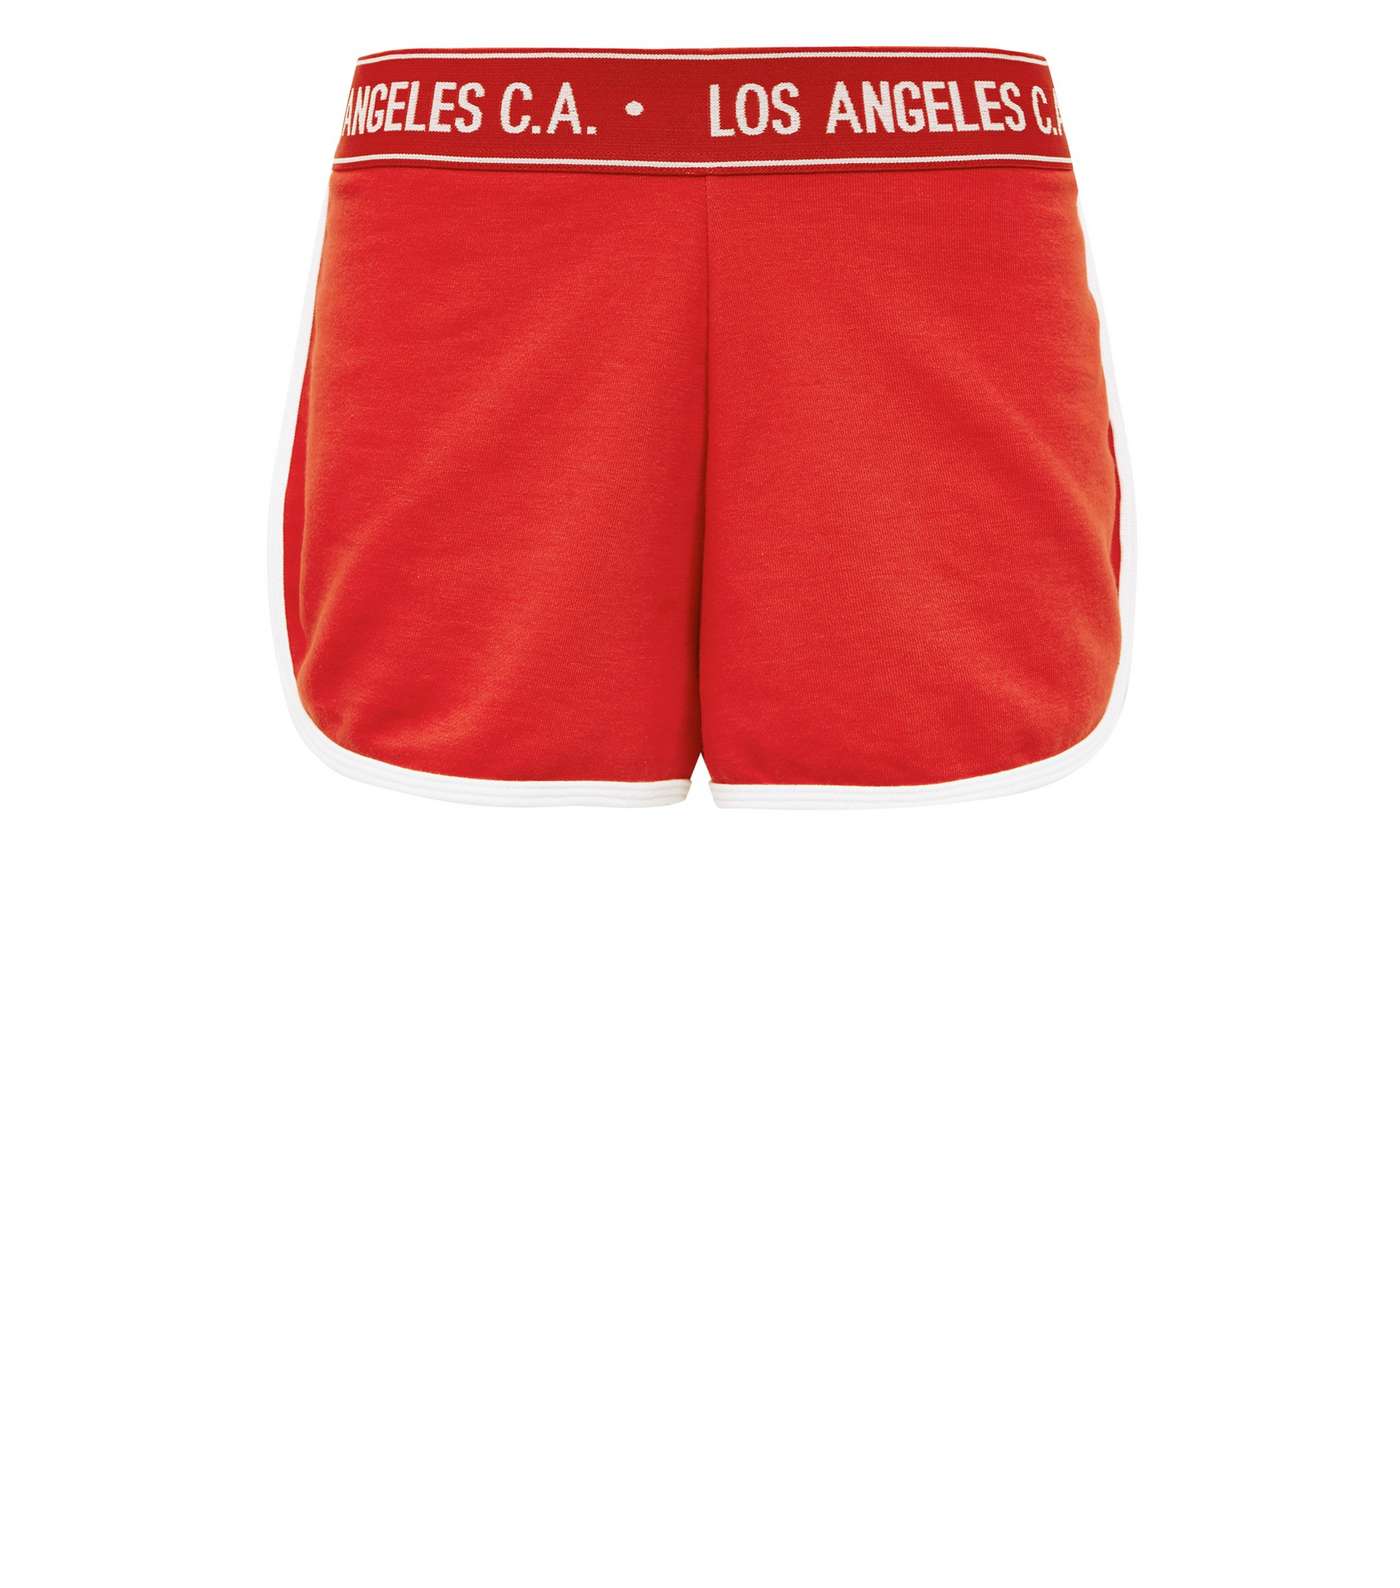 Red Los Angeles Waistband Runner Shorts Image 4